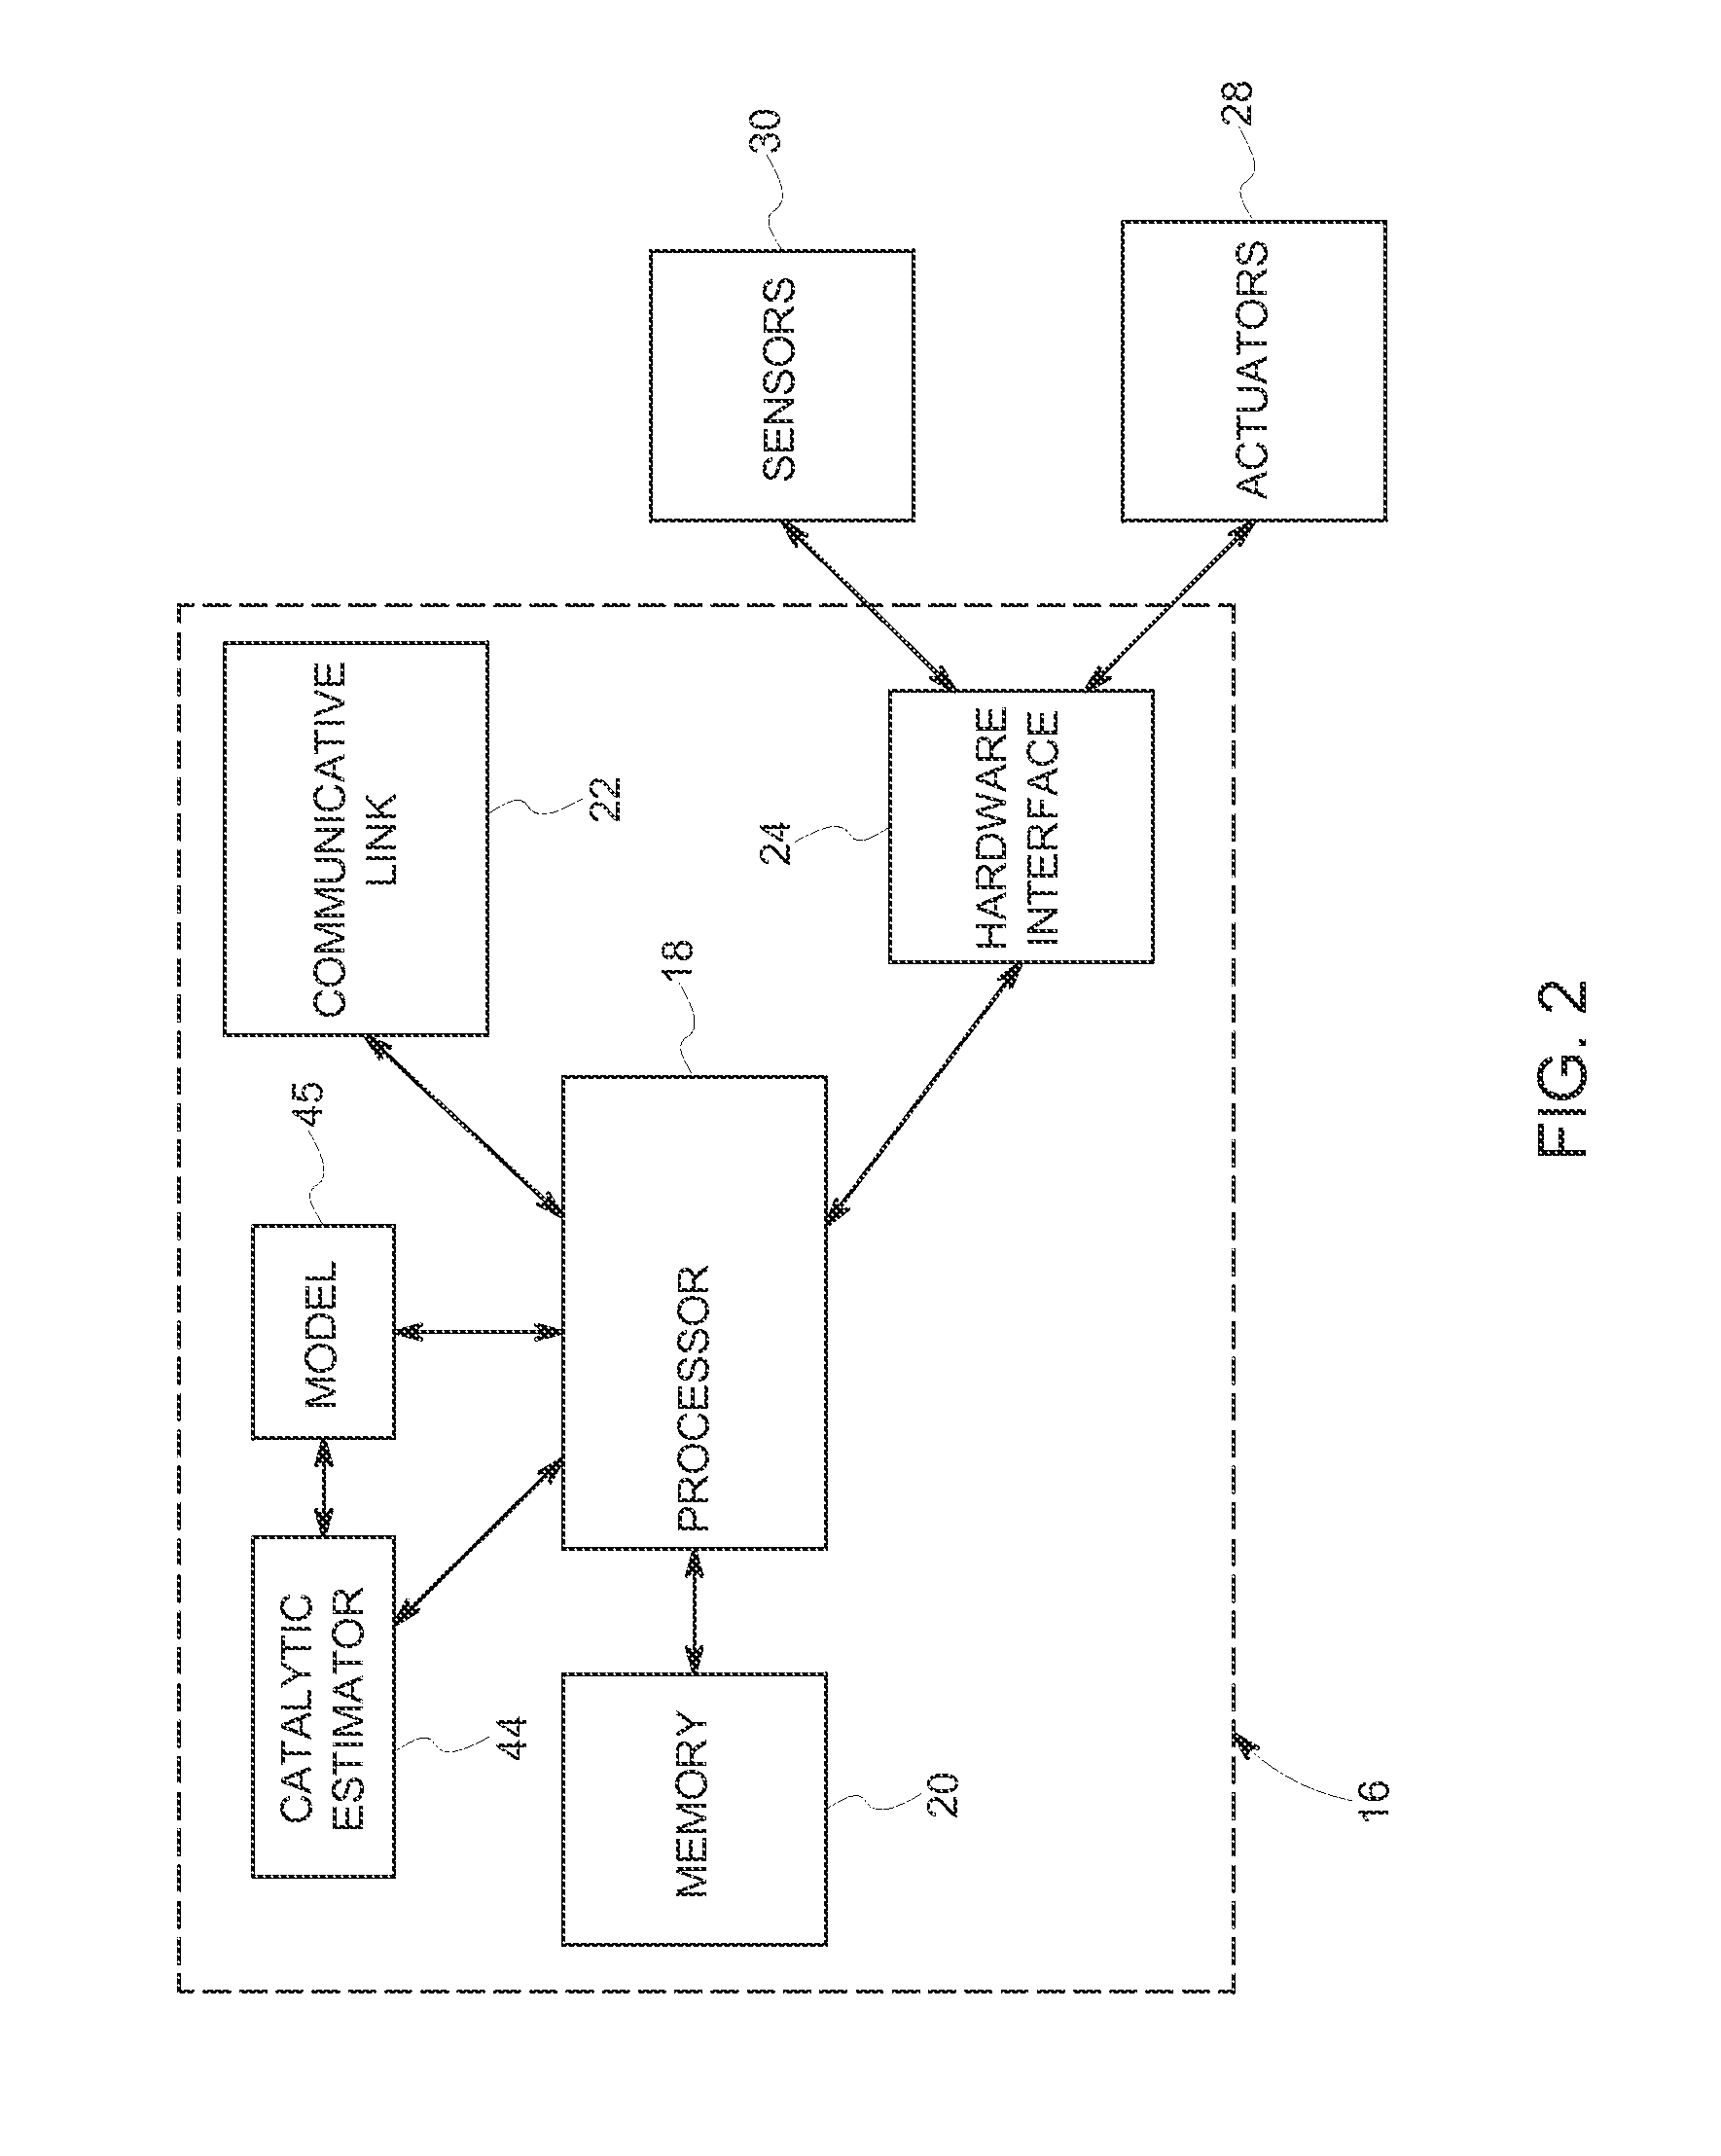 Systems and methods for model based control of catalytic converter systems